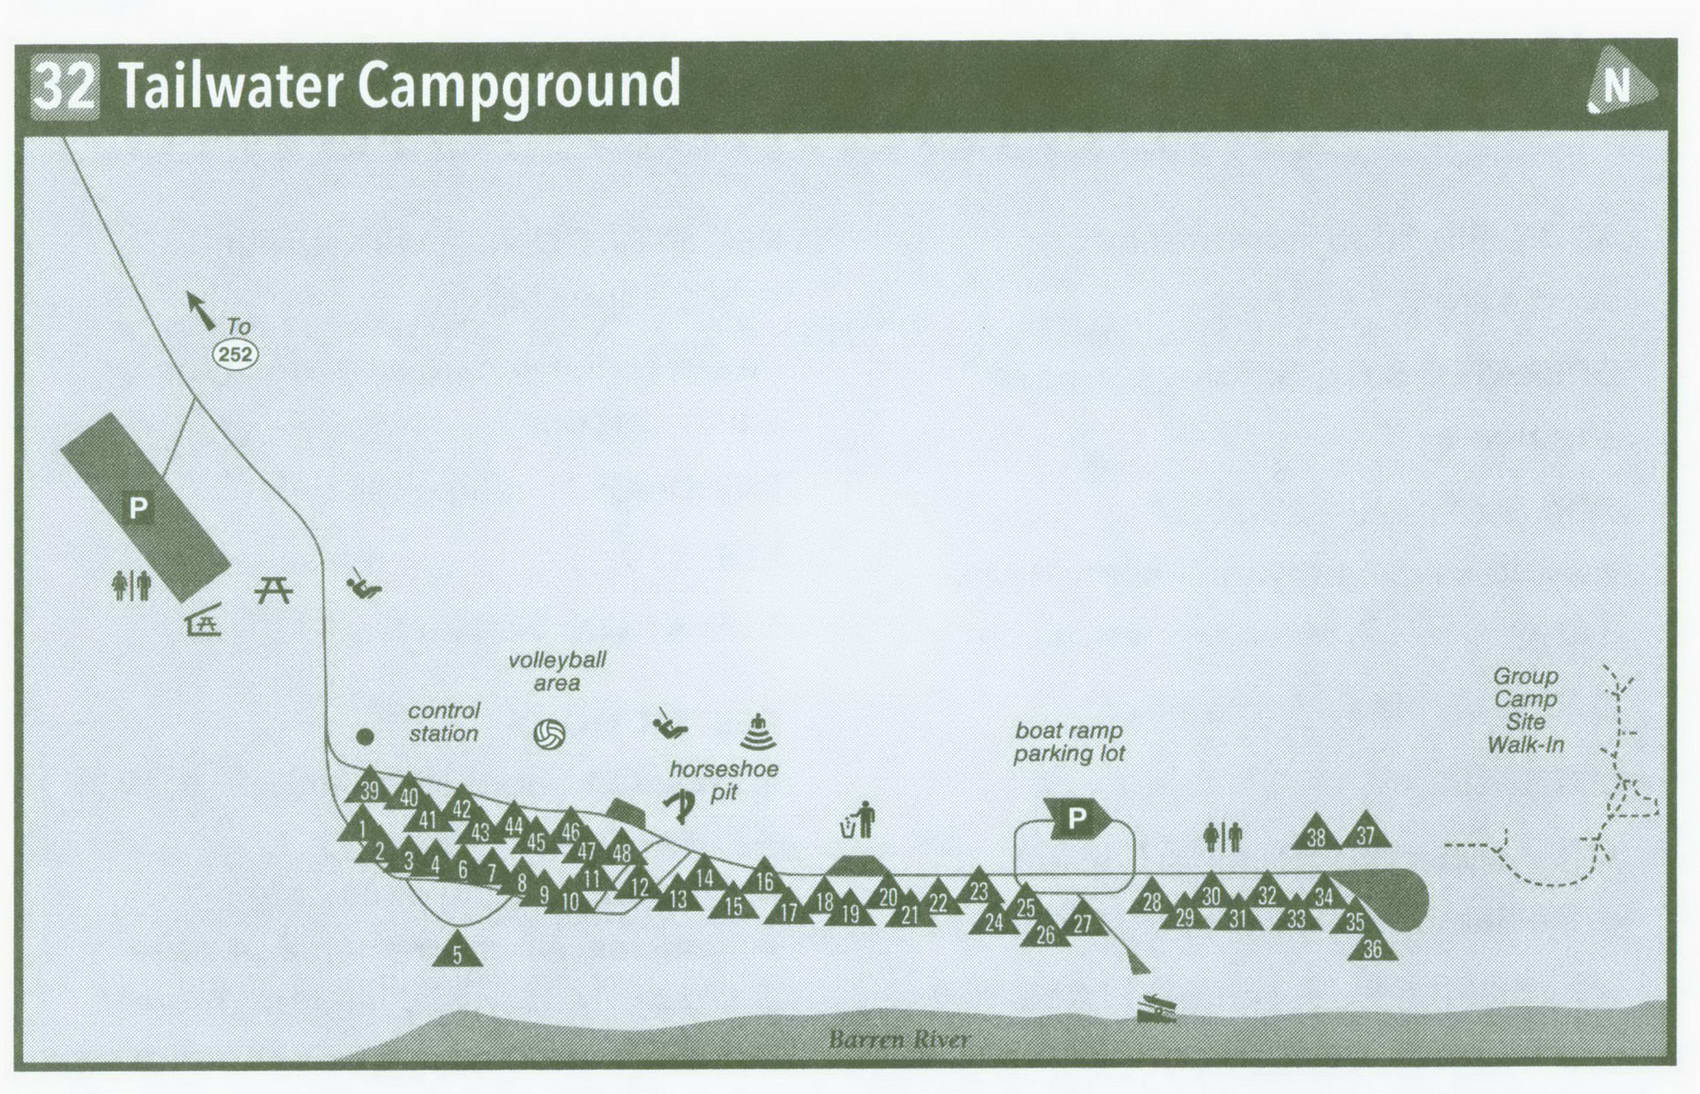 Plan of Tailwater Campground